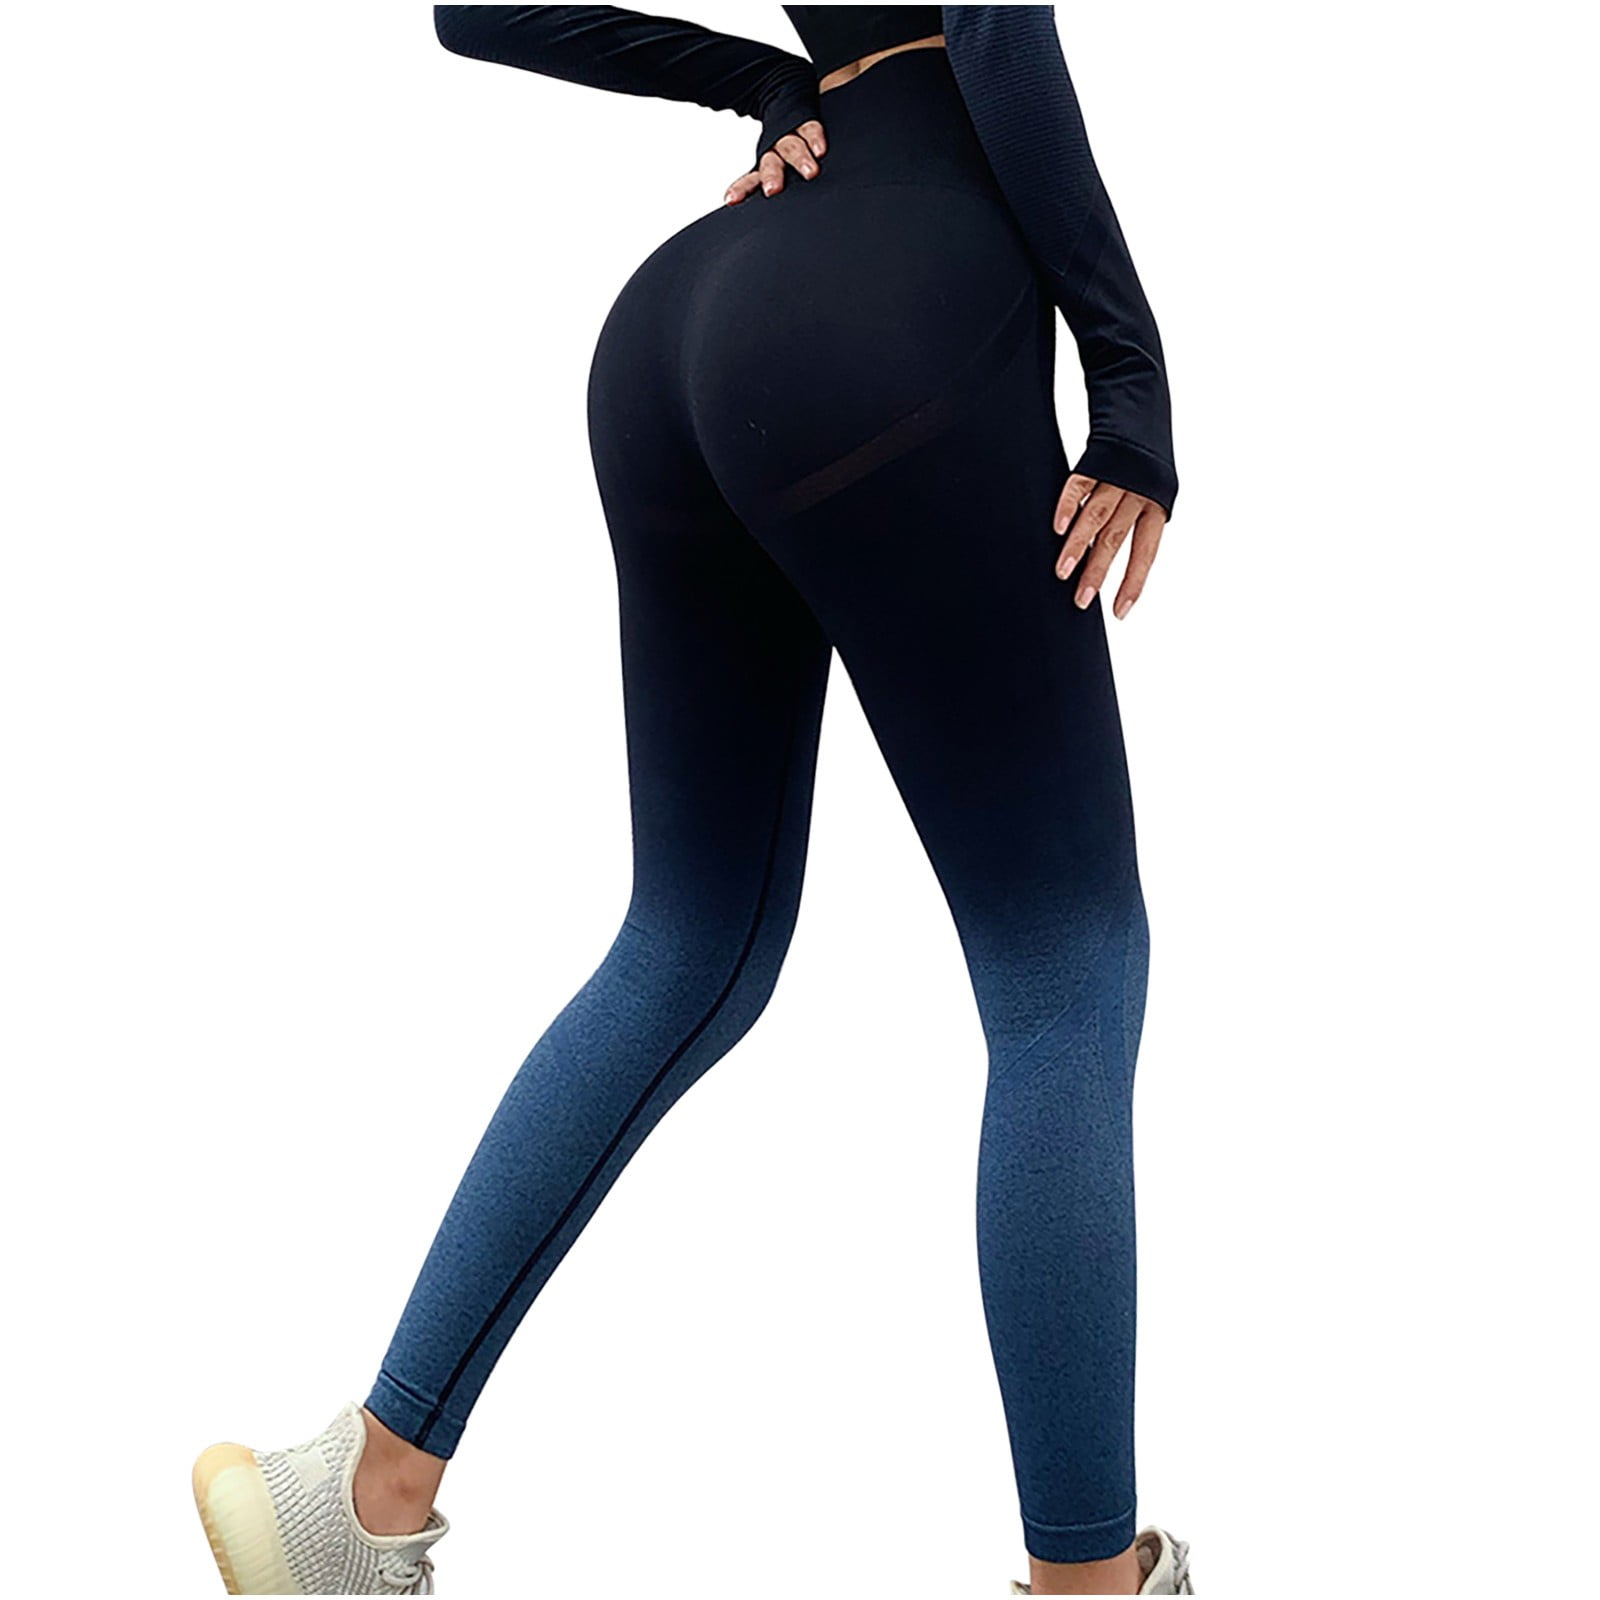 Buy Trilece Womens Leggings - High Waisted with Pockets - Tummy Control  Yoga Pants - Running Workout Compression Tight (White-Black, XXX-Large) at  Amazon.in